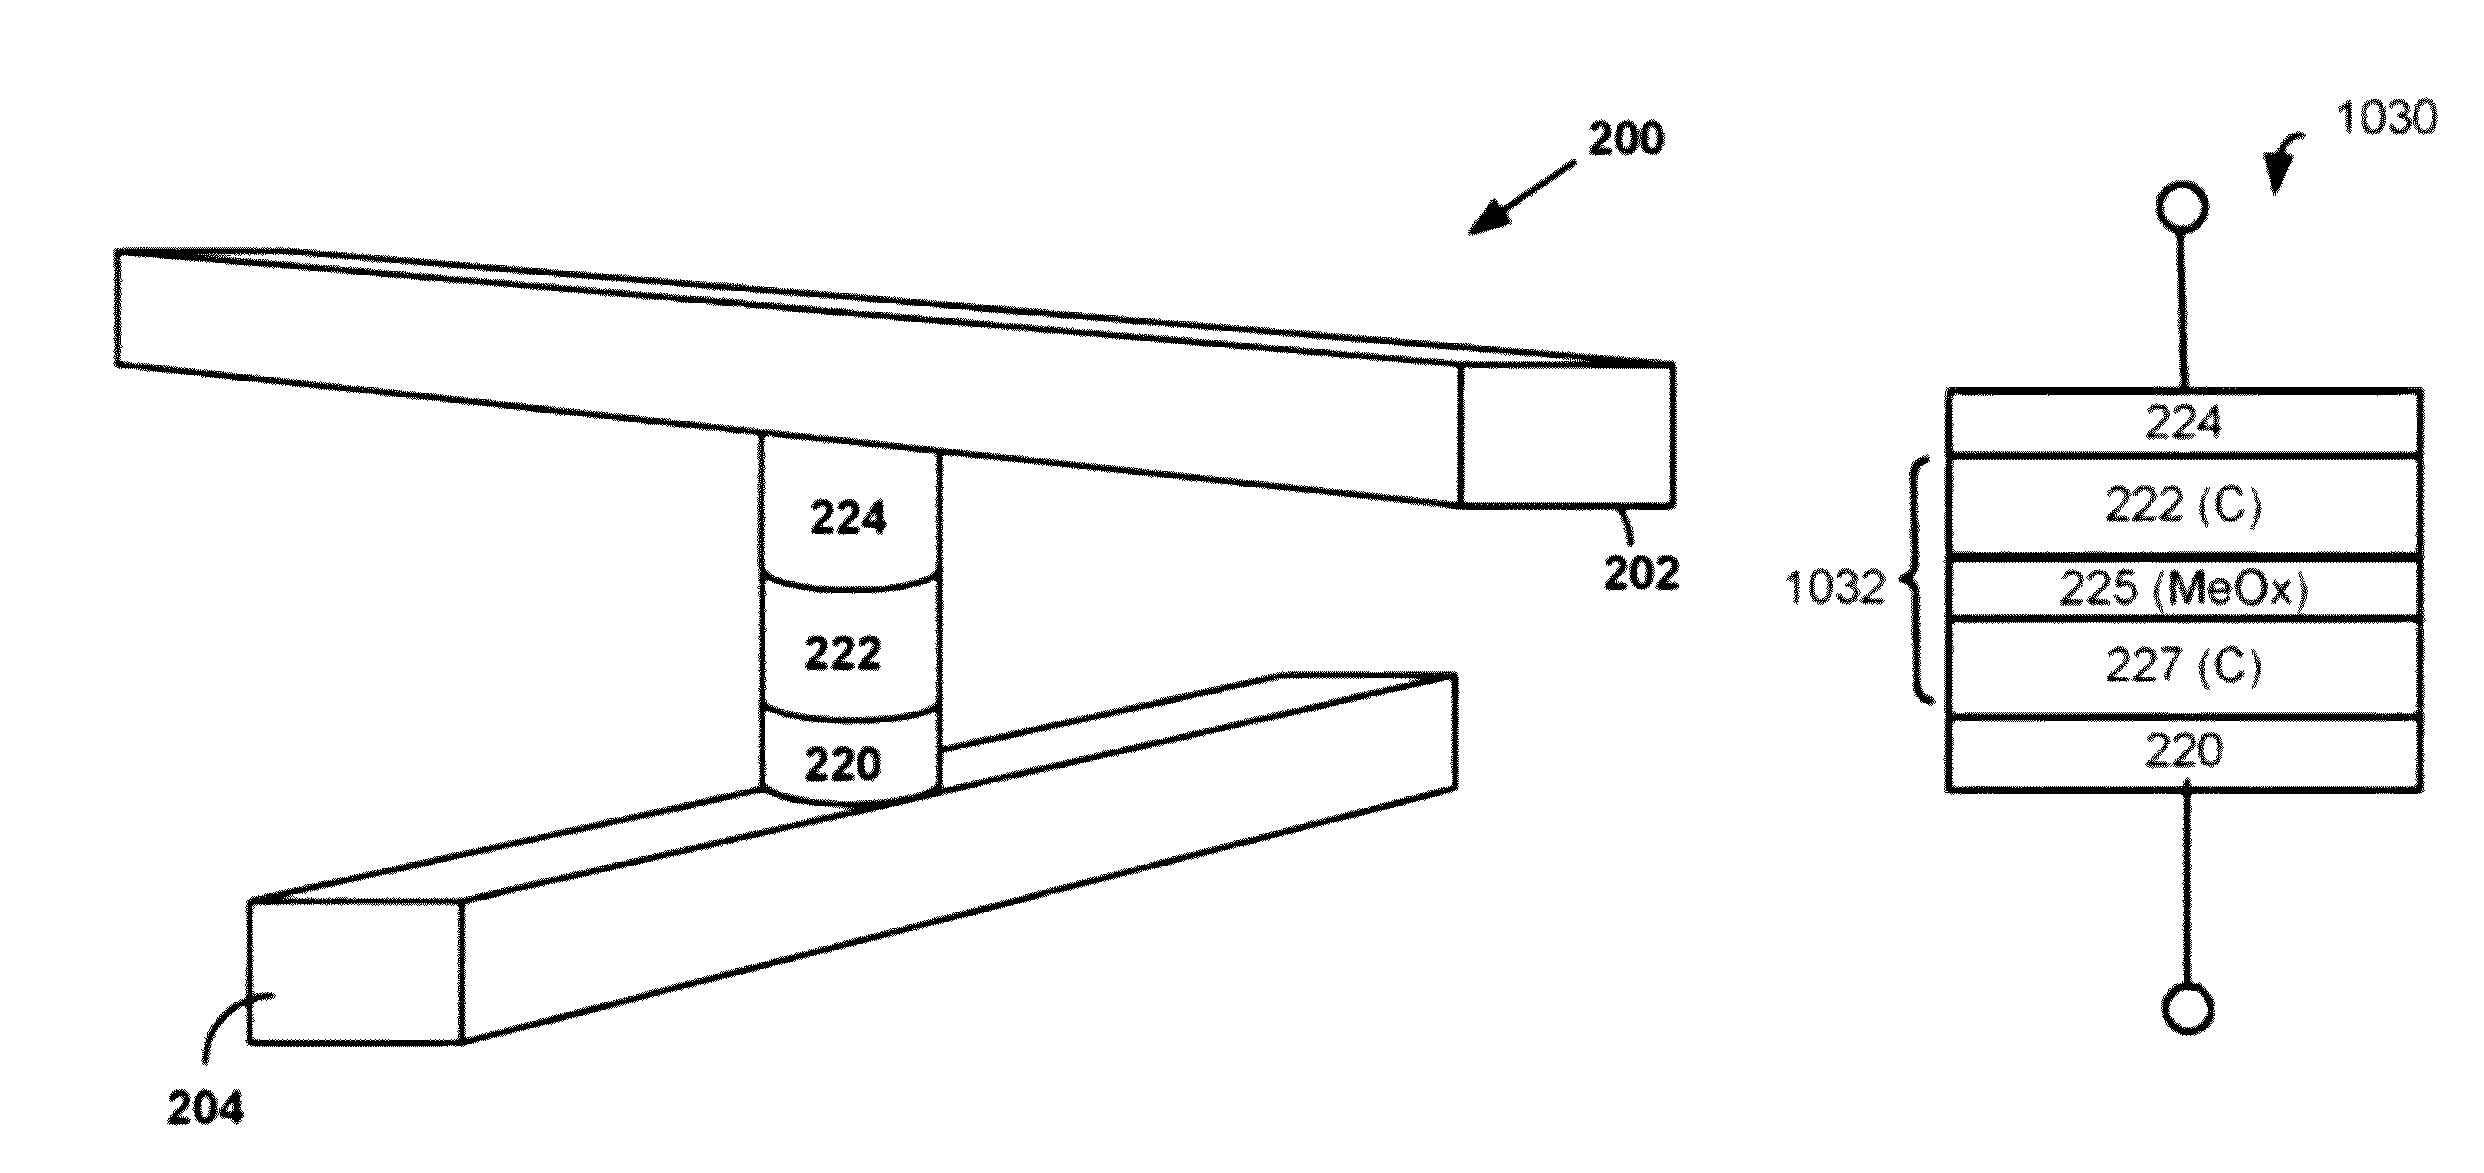 Non-volatile storage system using opposite polarity programming signals for MIM memory cell